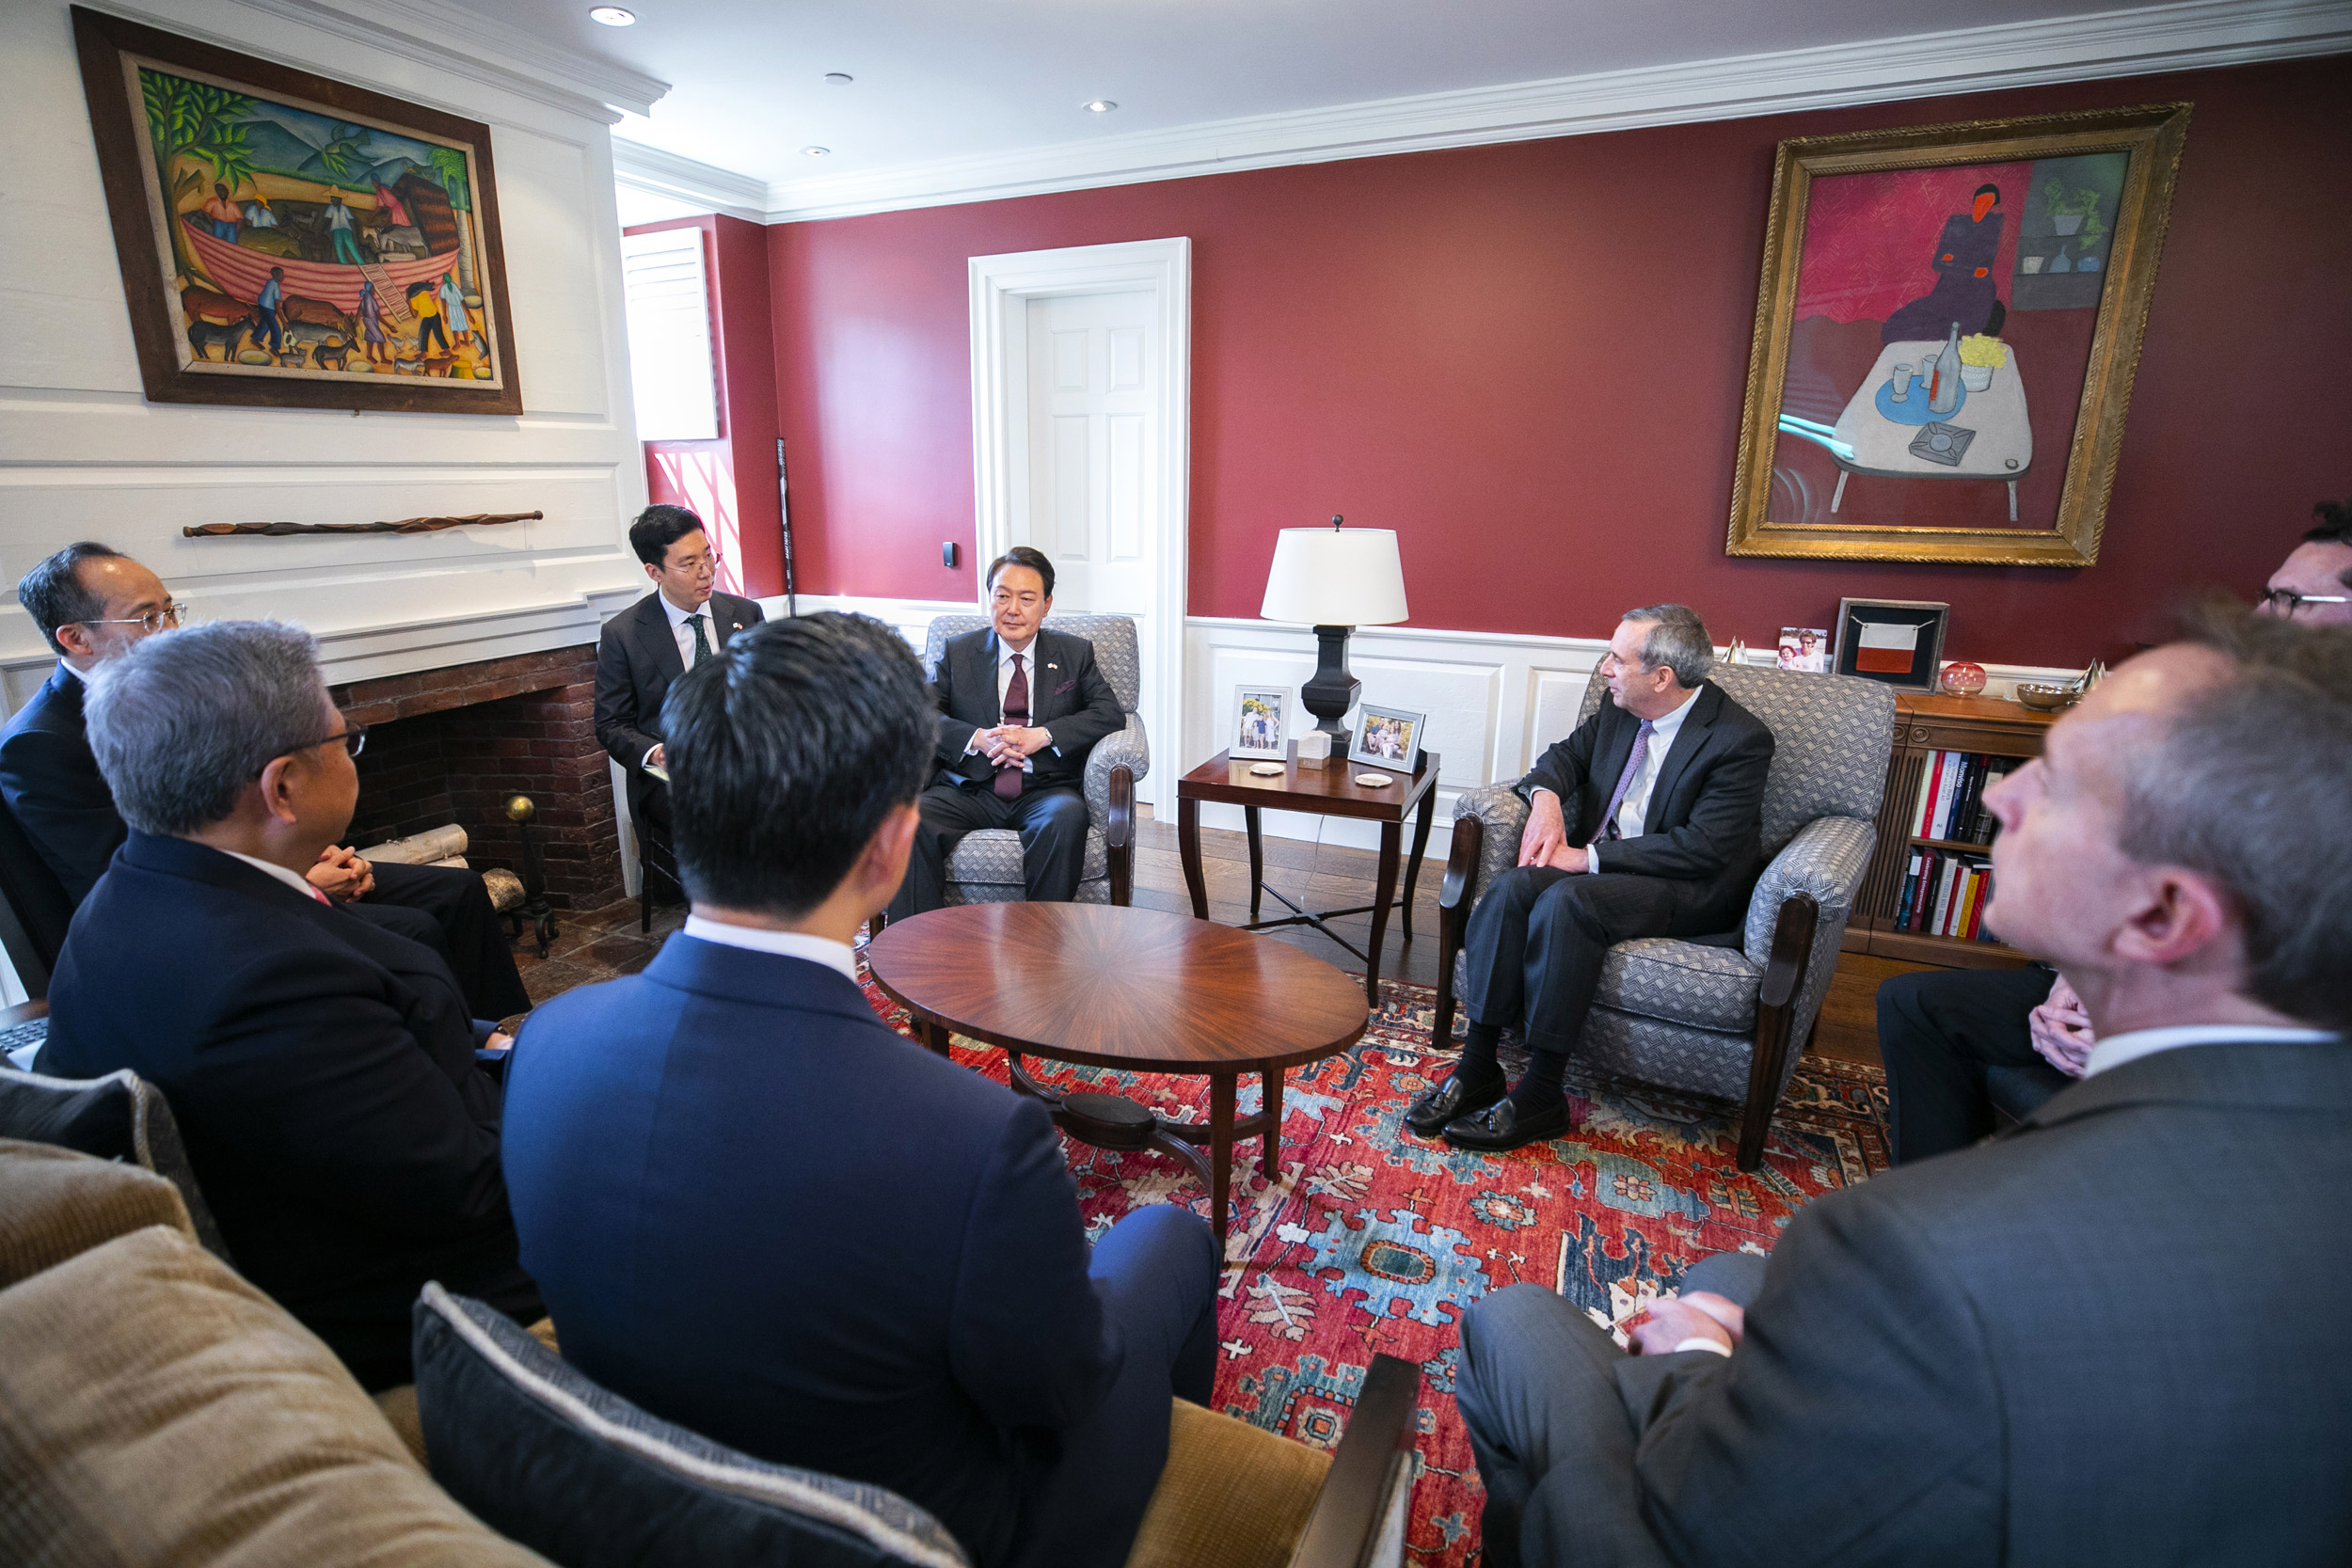 South Korea President Yoon Suk Yeol met with Bacow in Massachusetts Hall during a Harvard visit in April 2023.